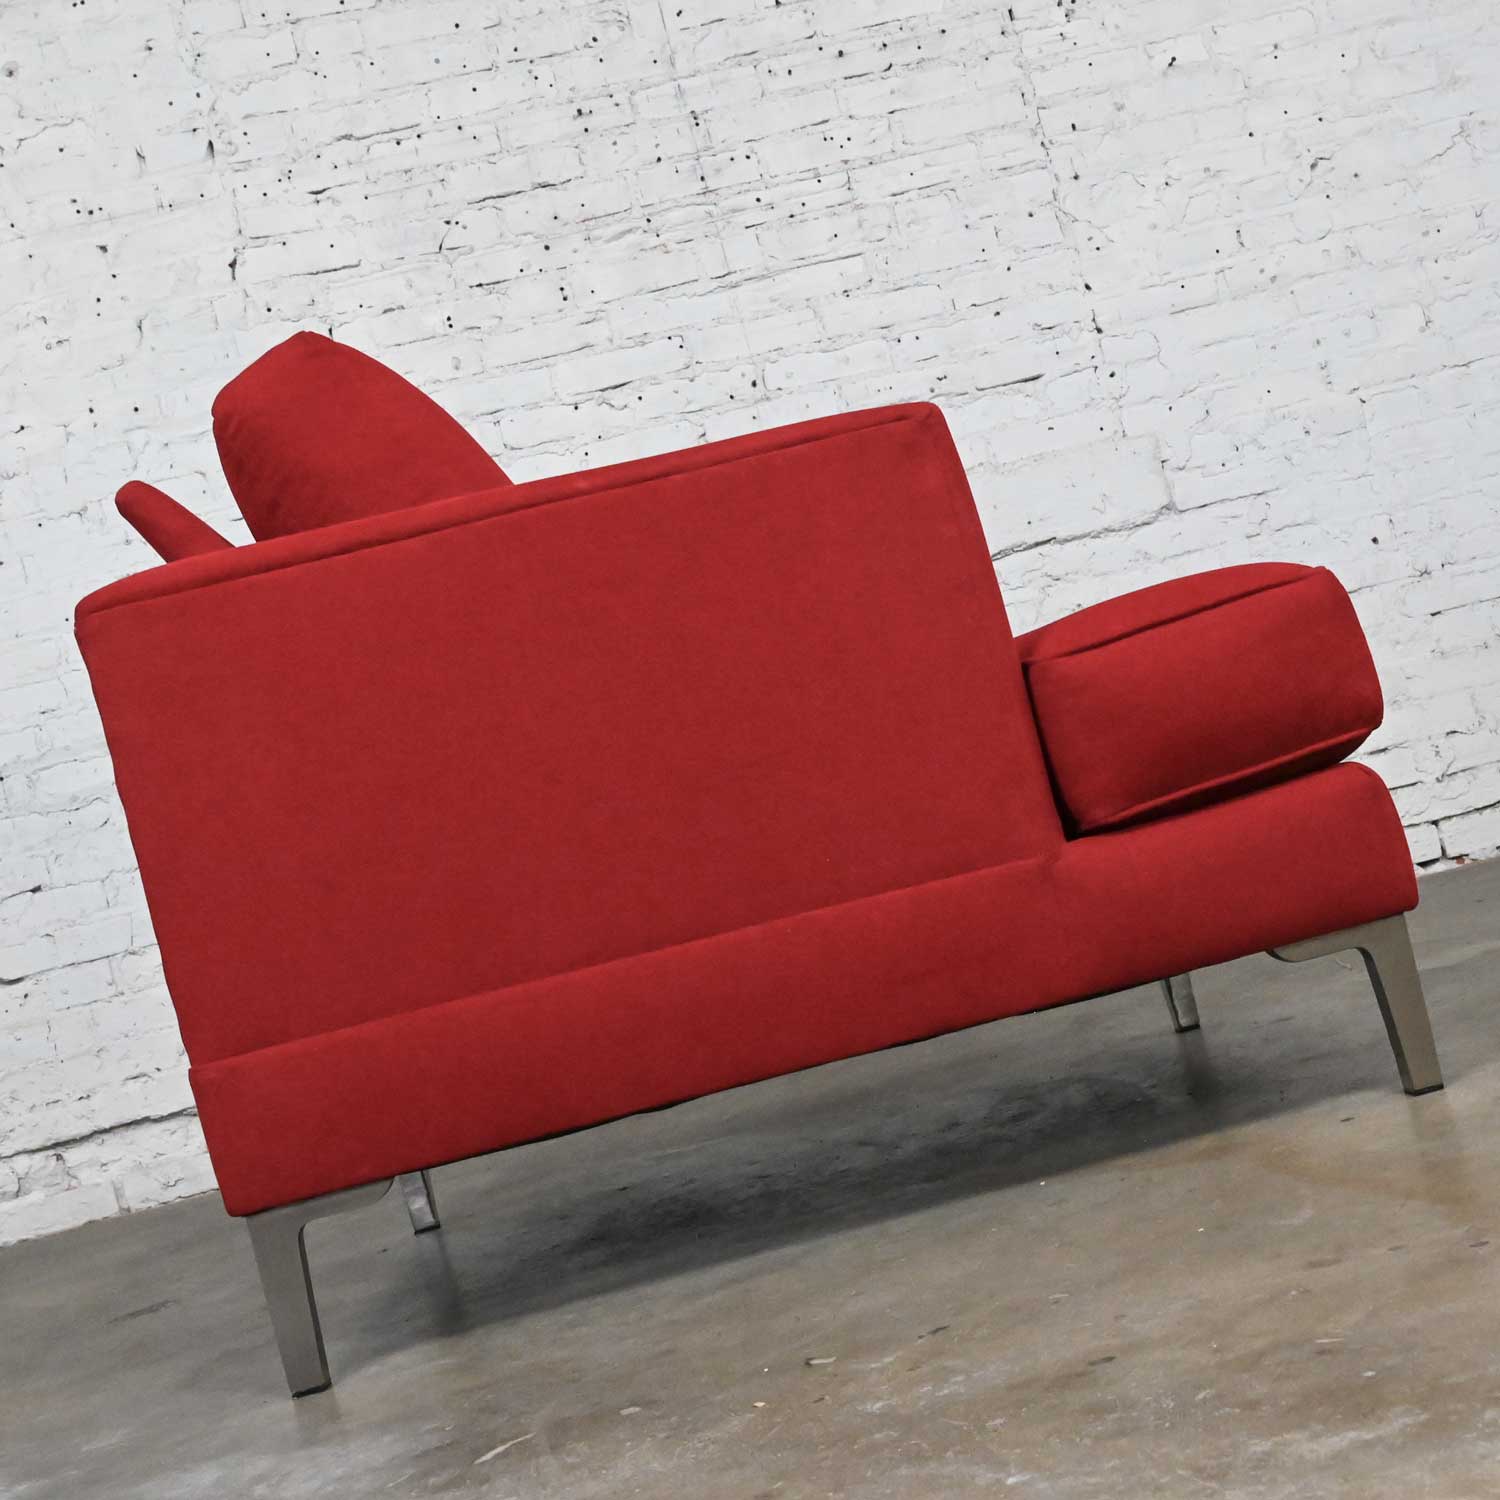 Late 20th to Early 21st Century Modern Carter Club Chair Attr Zen Collection Bright Red with Polished Steel Legs